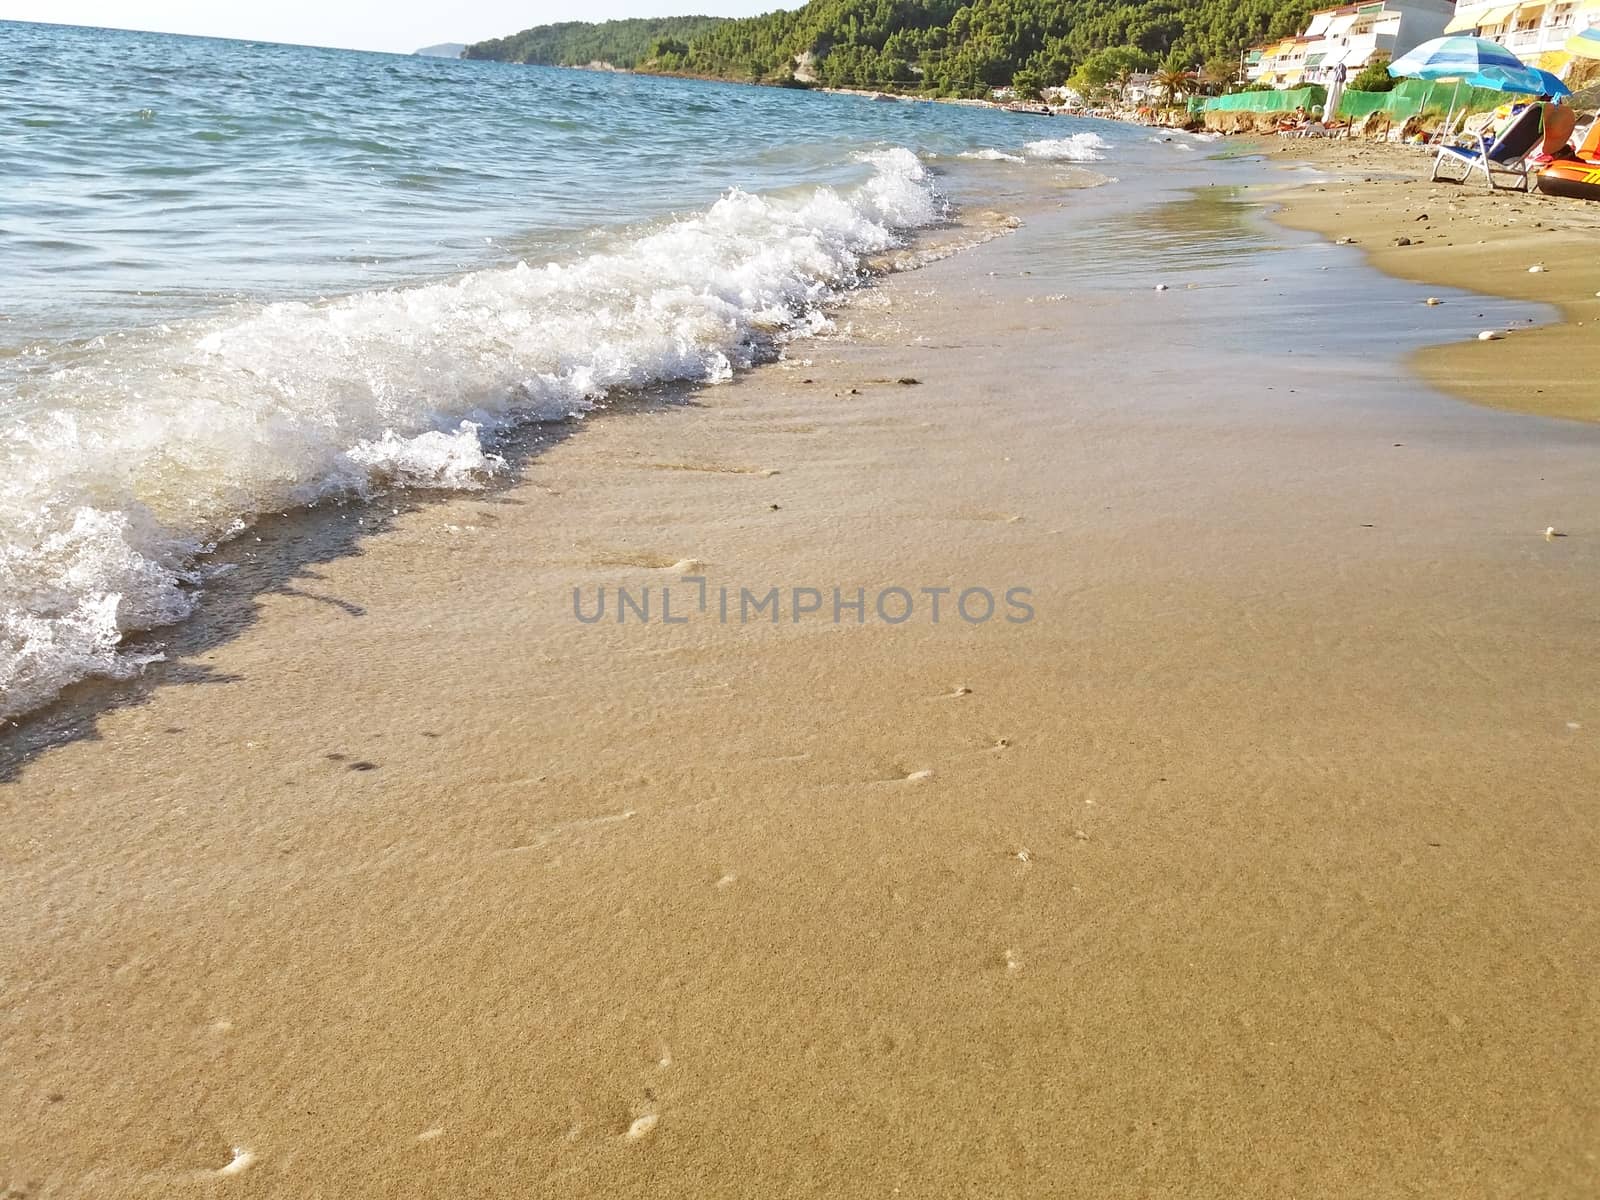 At the beach, Mediterranean Sea in Greece, the waves of the sea